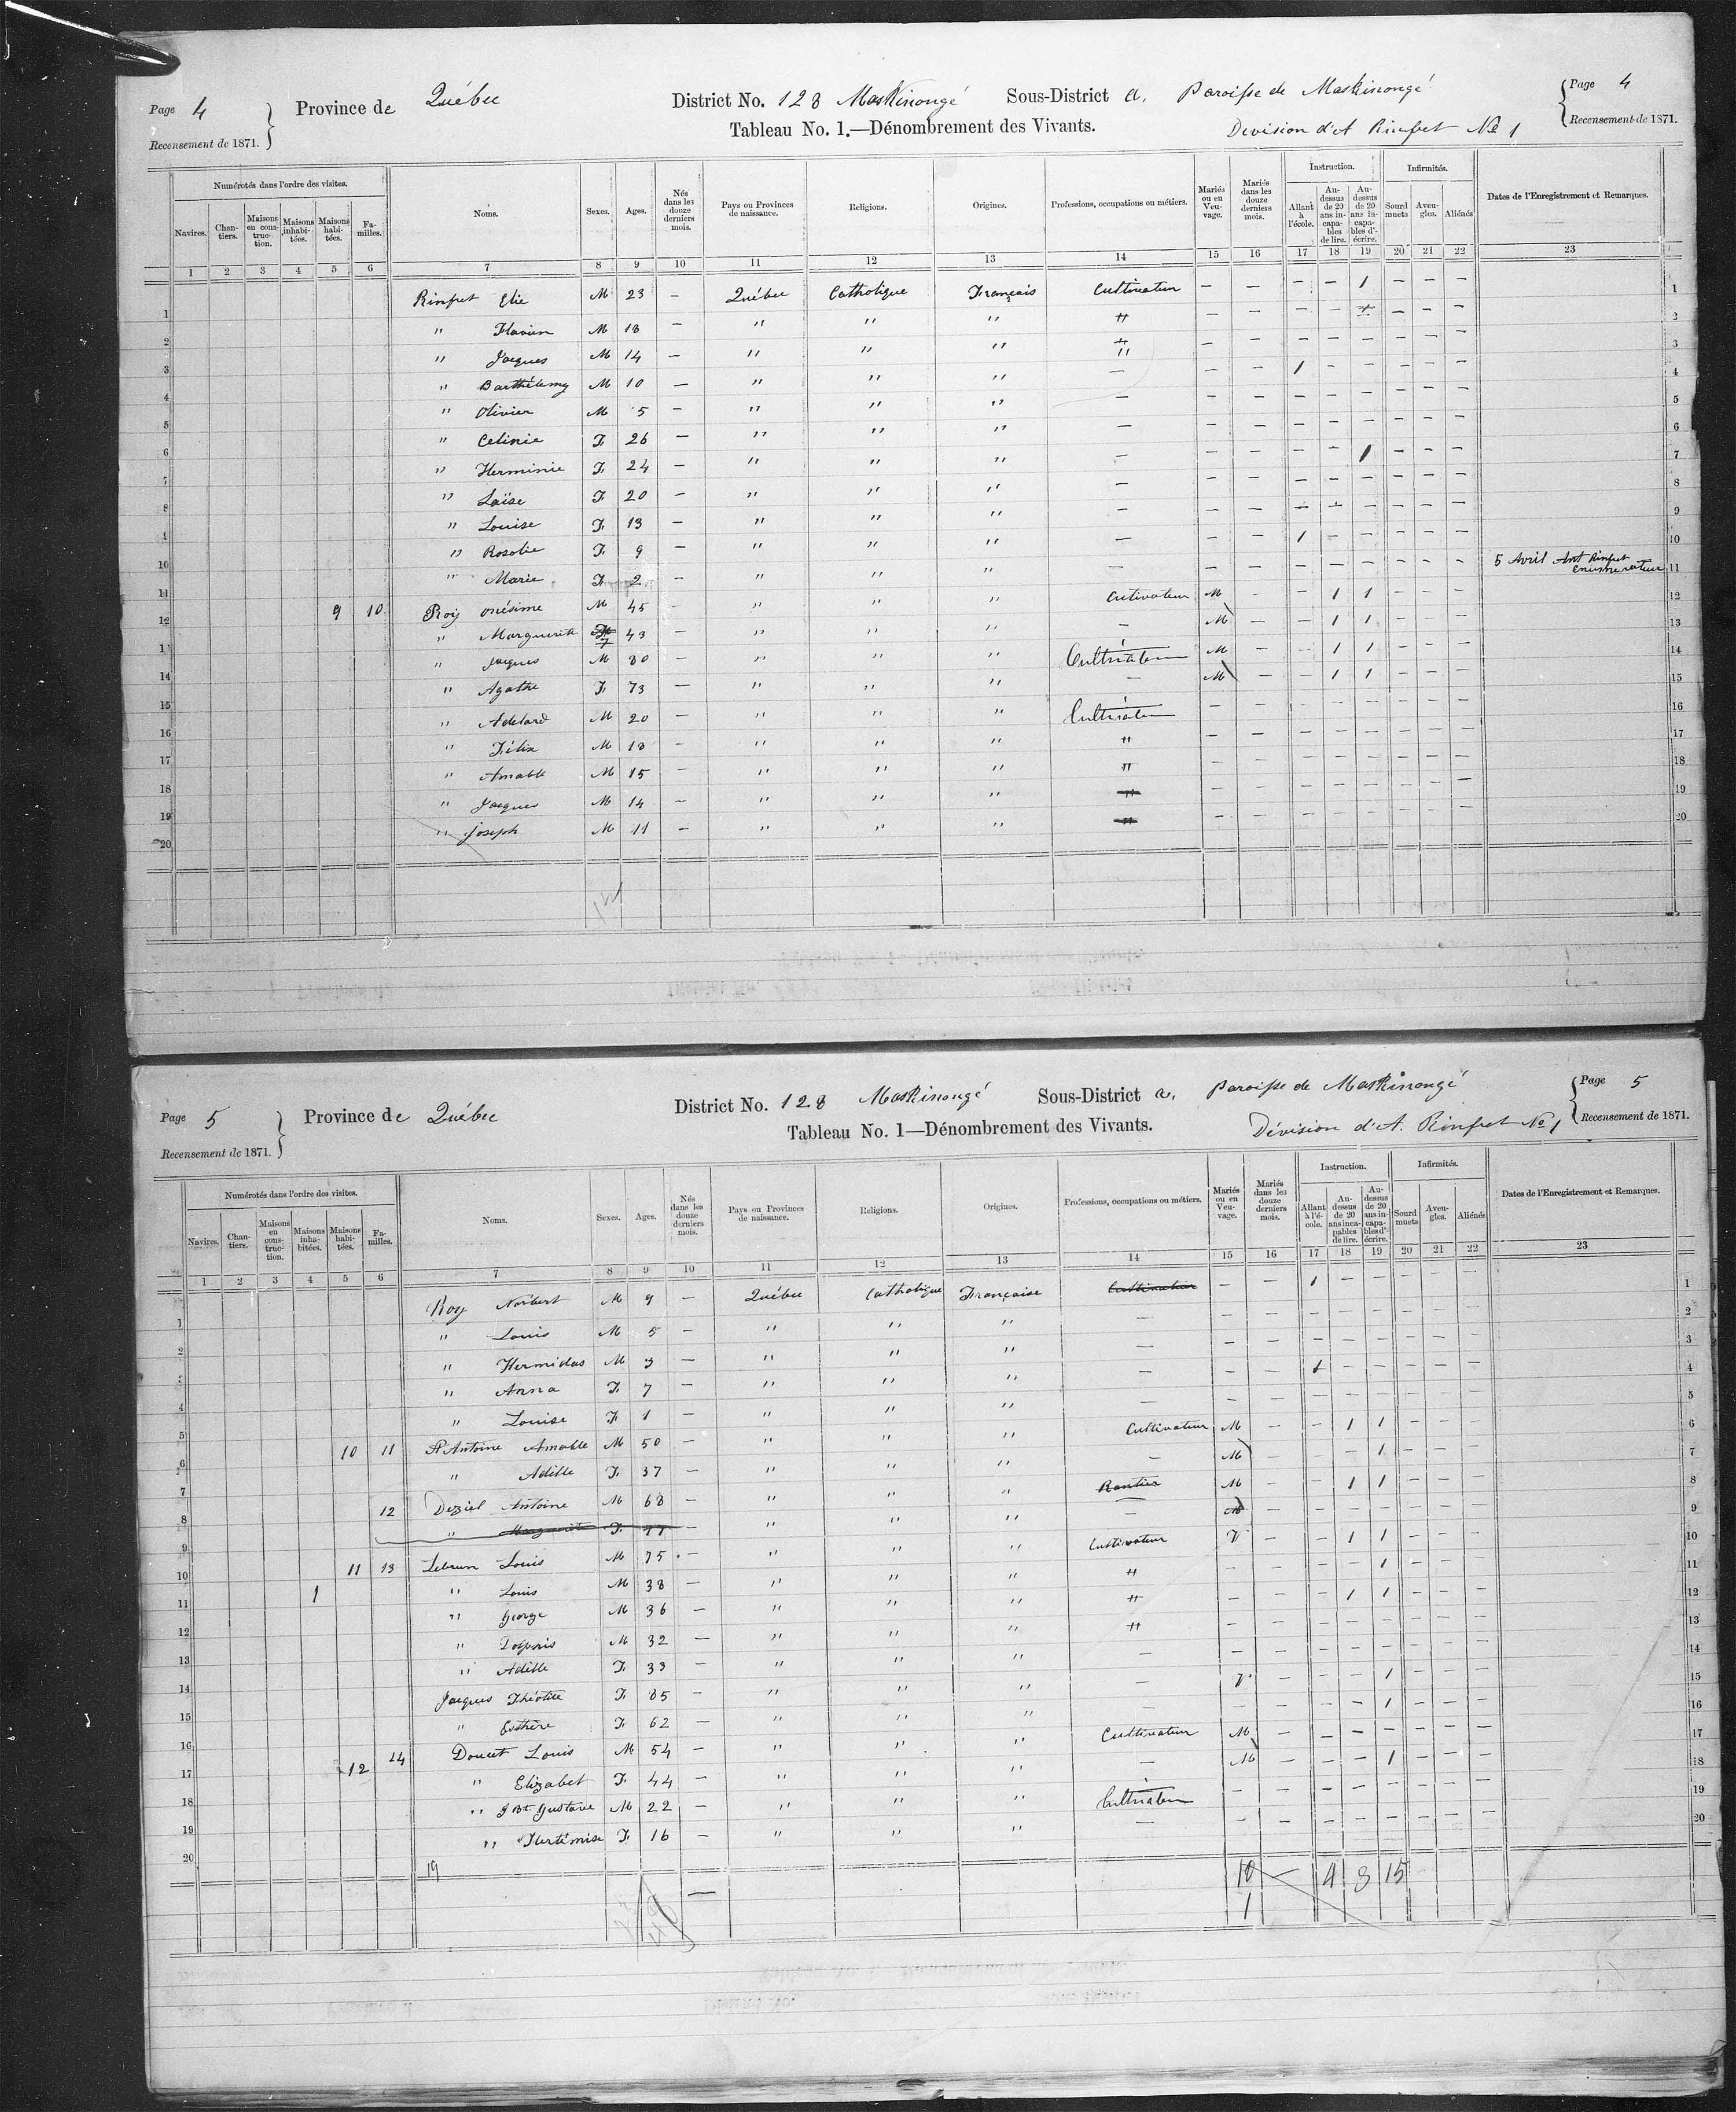 Title: Census of Canada, 1871 - Mikan Number: 142105 - Microform: c-10075